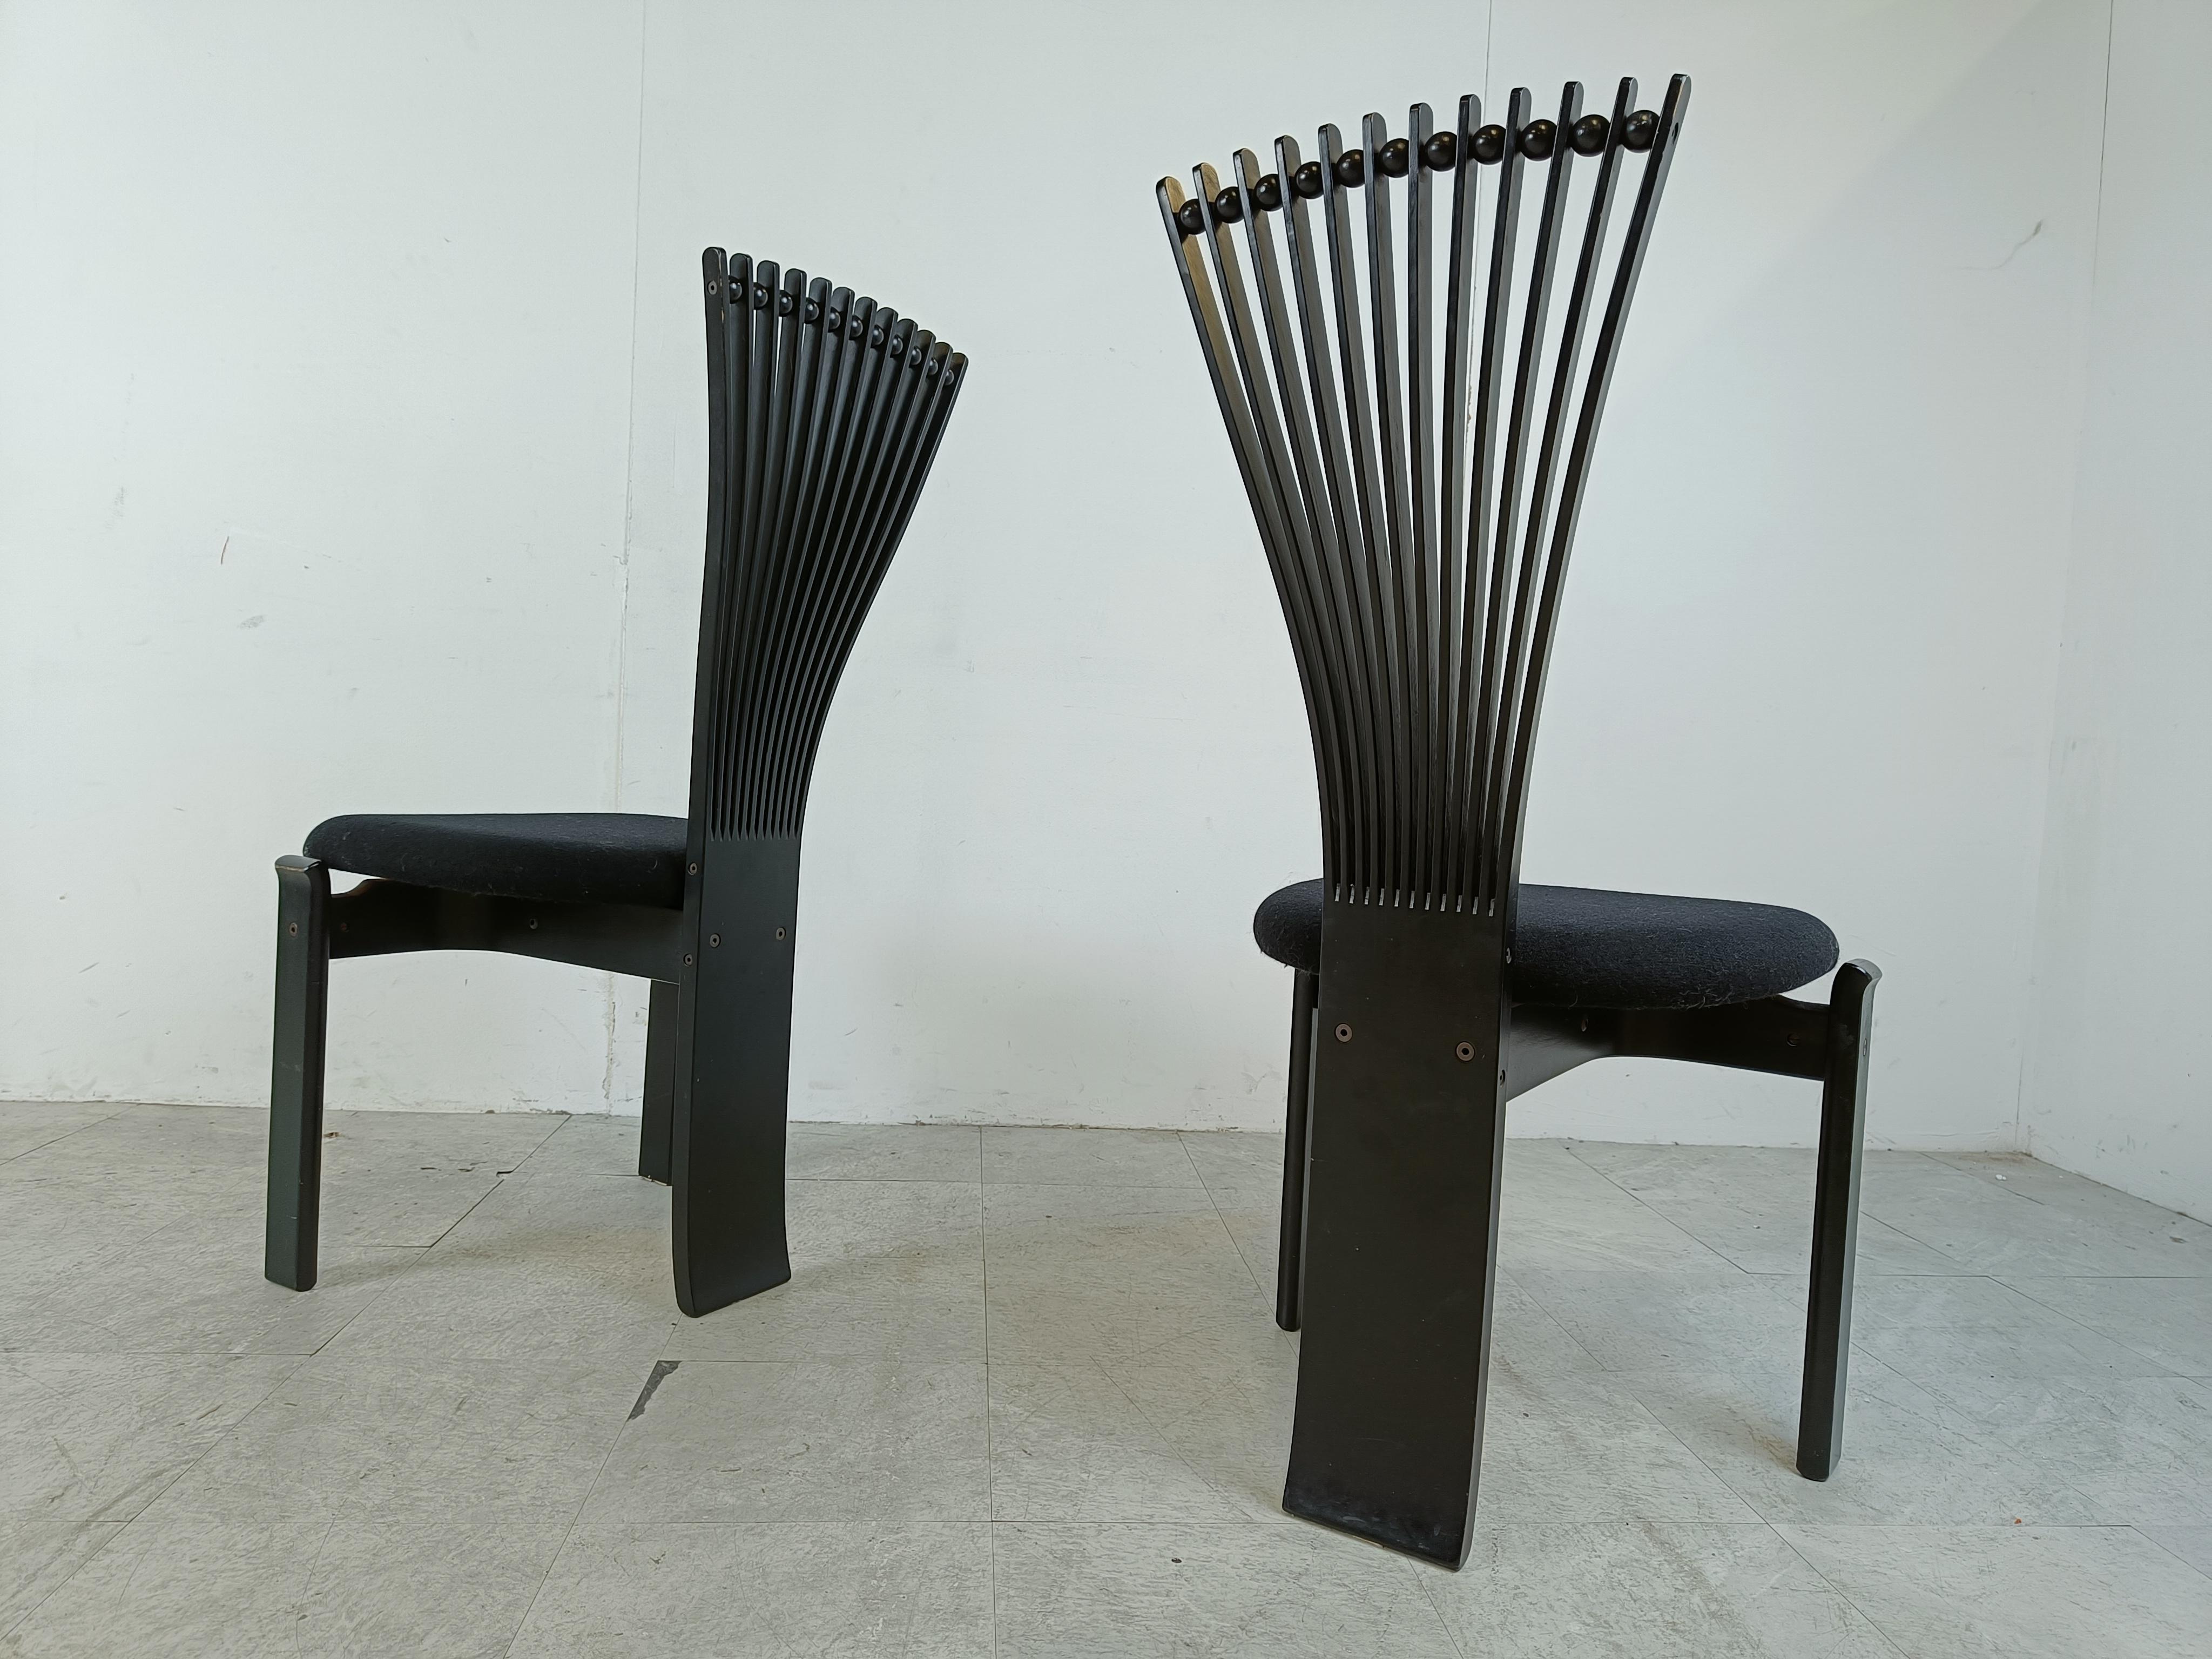 Totem chairs by Torstein Nislen for Westnofa, 1980s For Sale 2